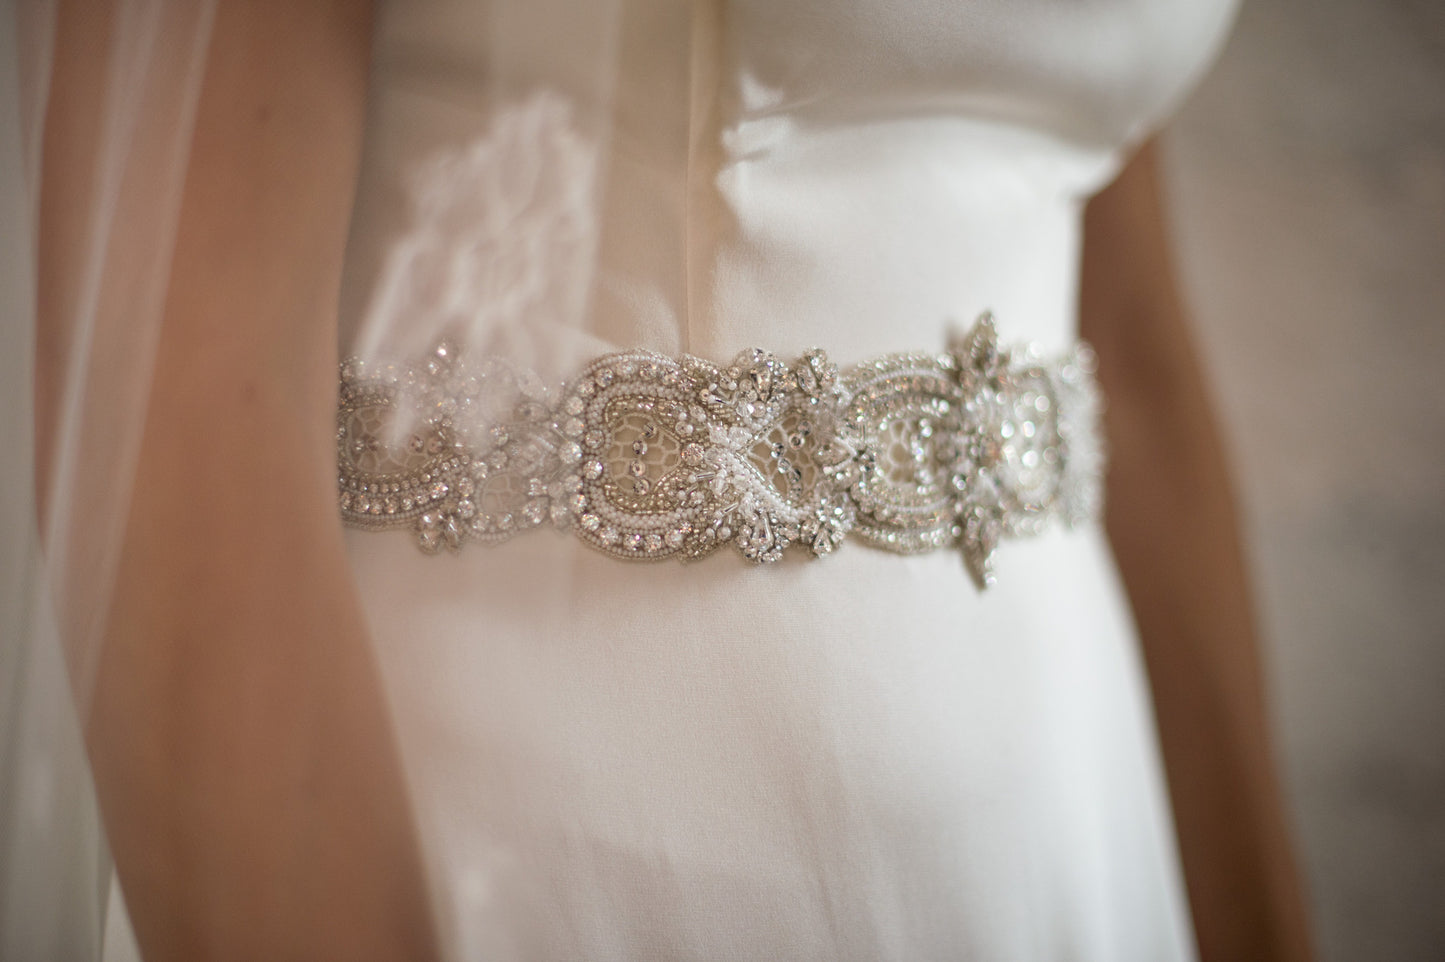 Bridal Accessories and Wedding Jewelry, Camilla Christine, Allure Sash, Applique, Silver Ivory, Crochet Cutout Detail Crystal Beaded Tapered Width Long Sash